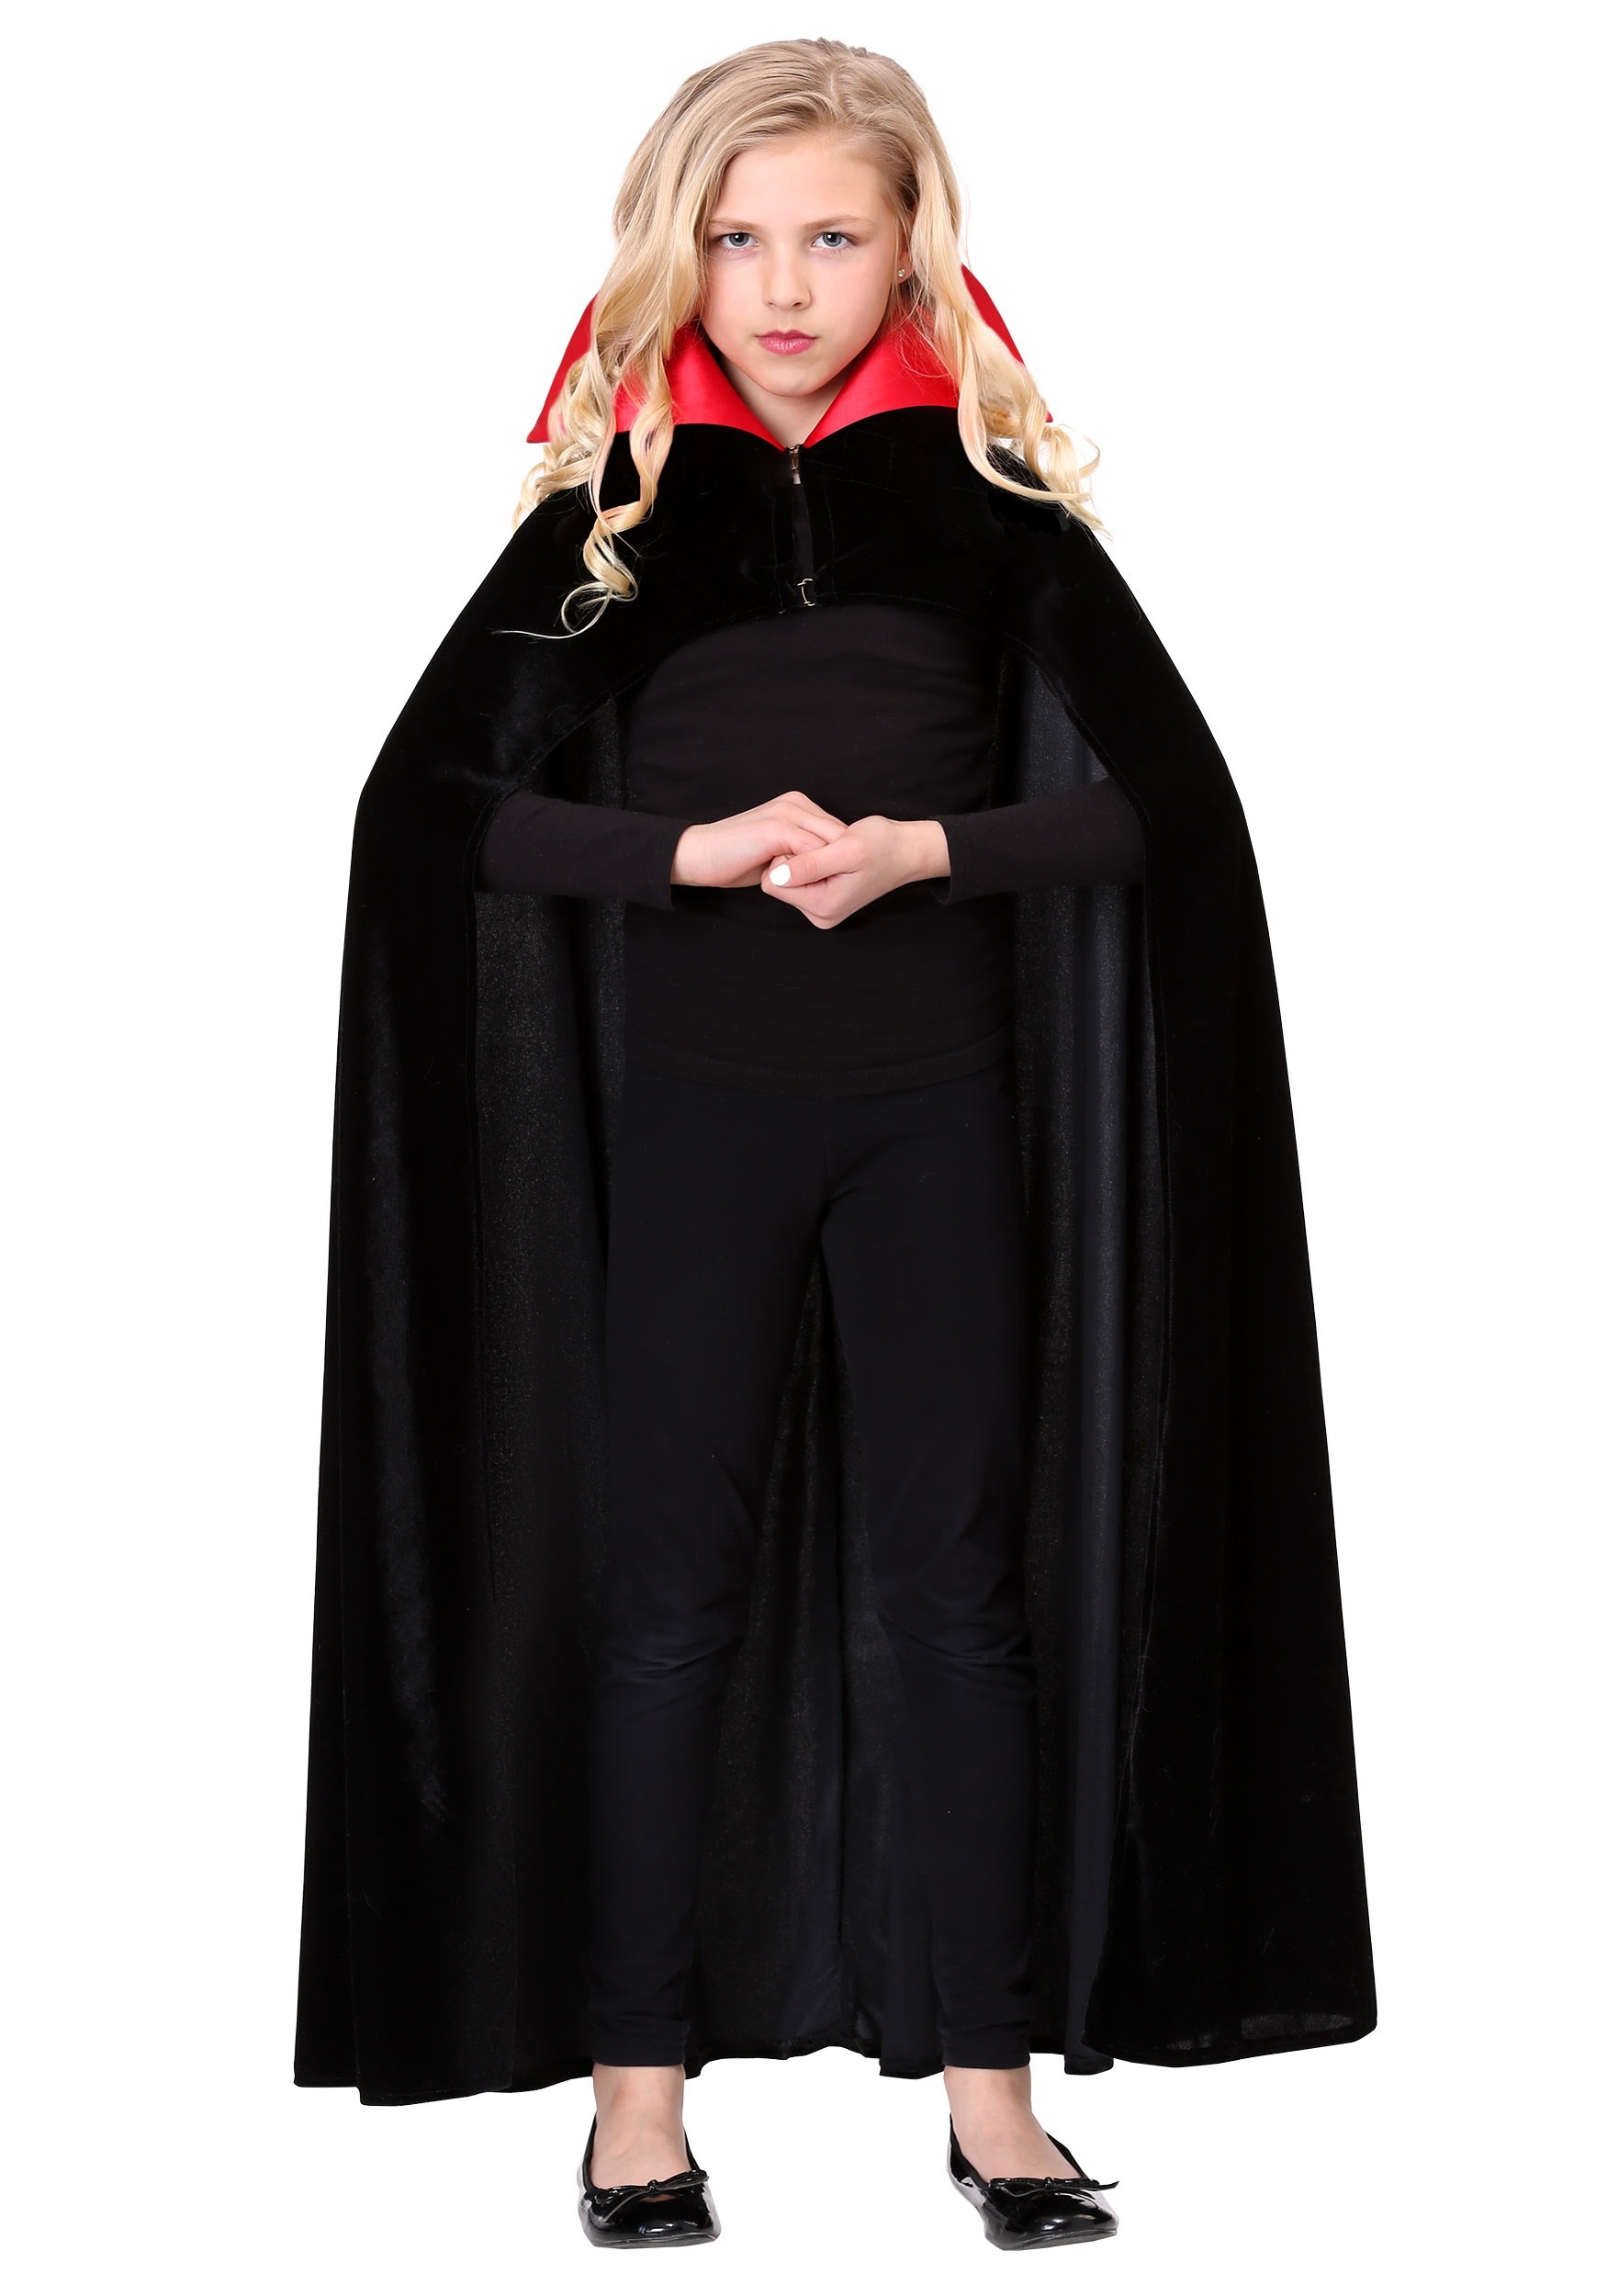 Red Collar Vampire Cloak Costume For A Child